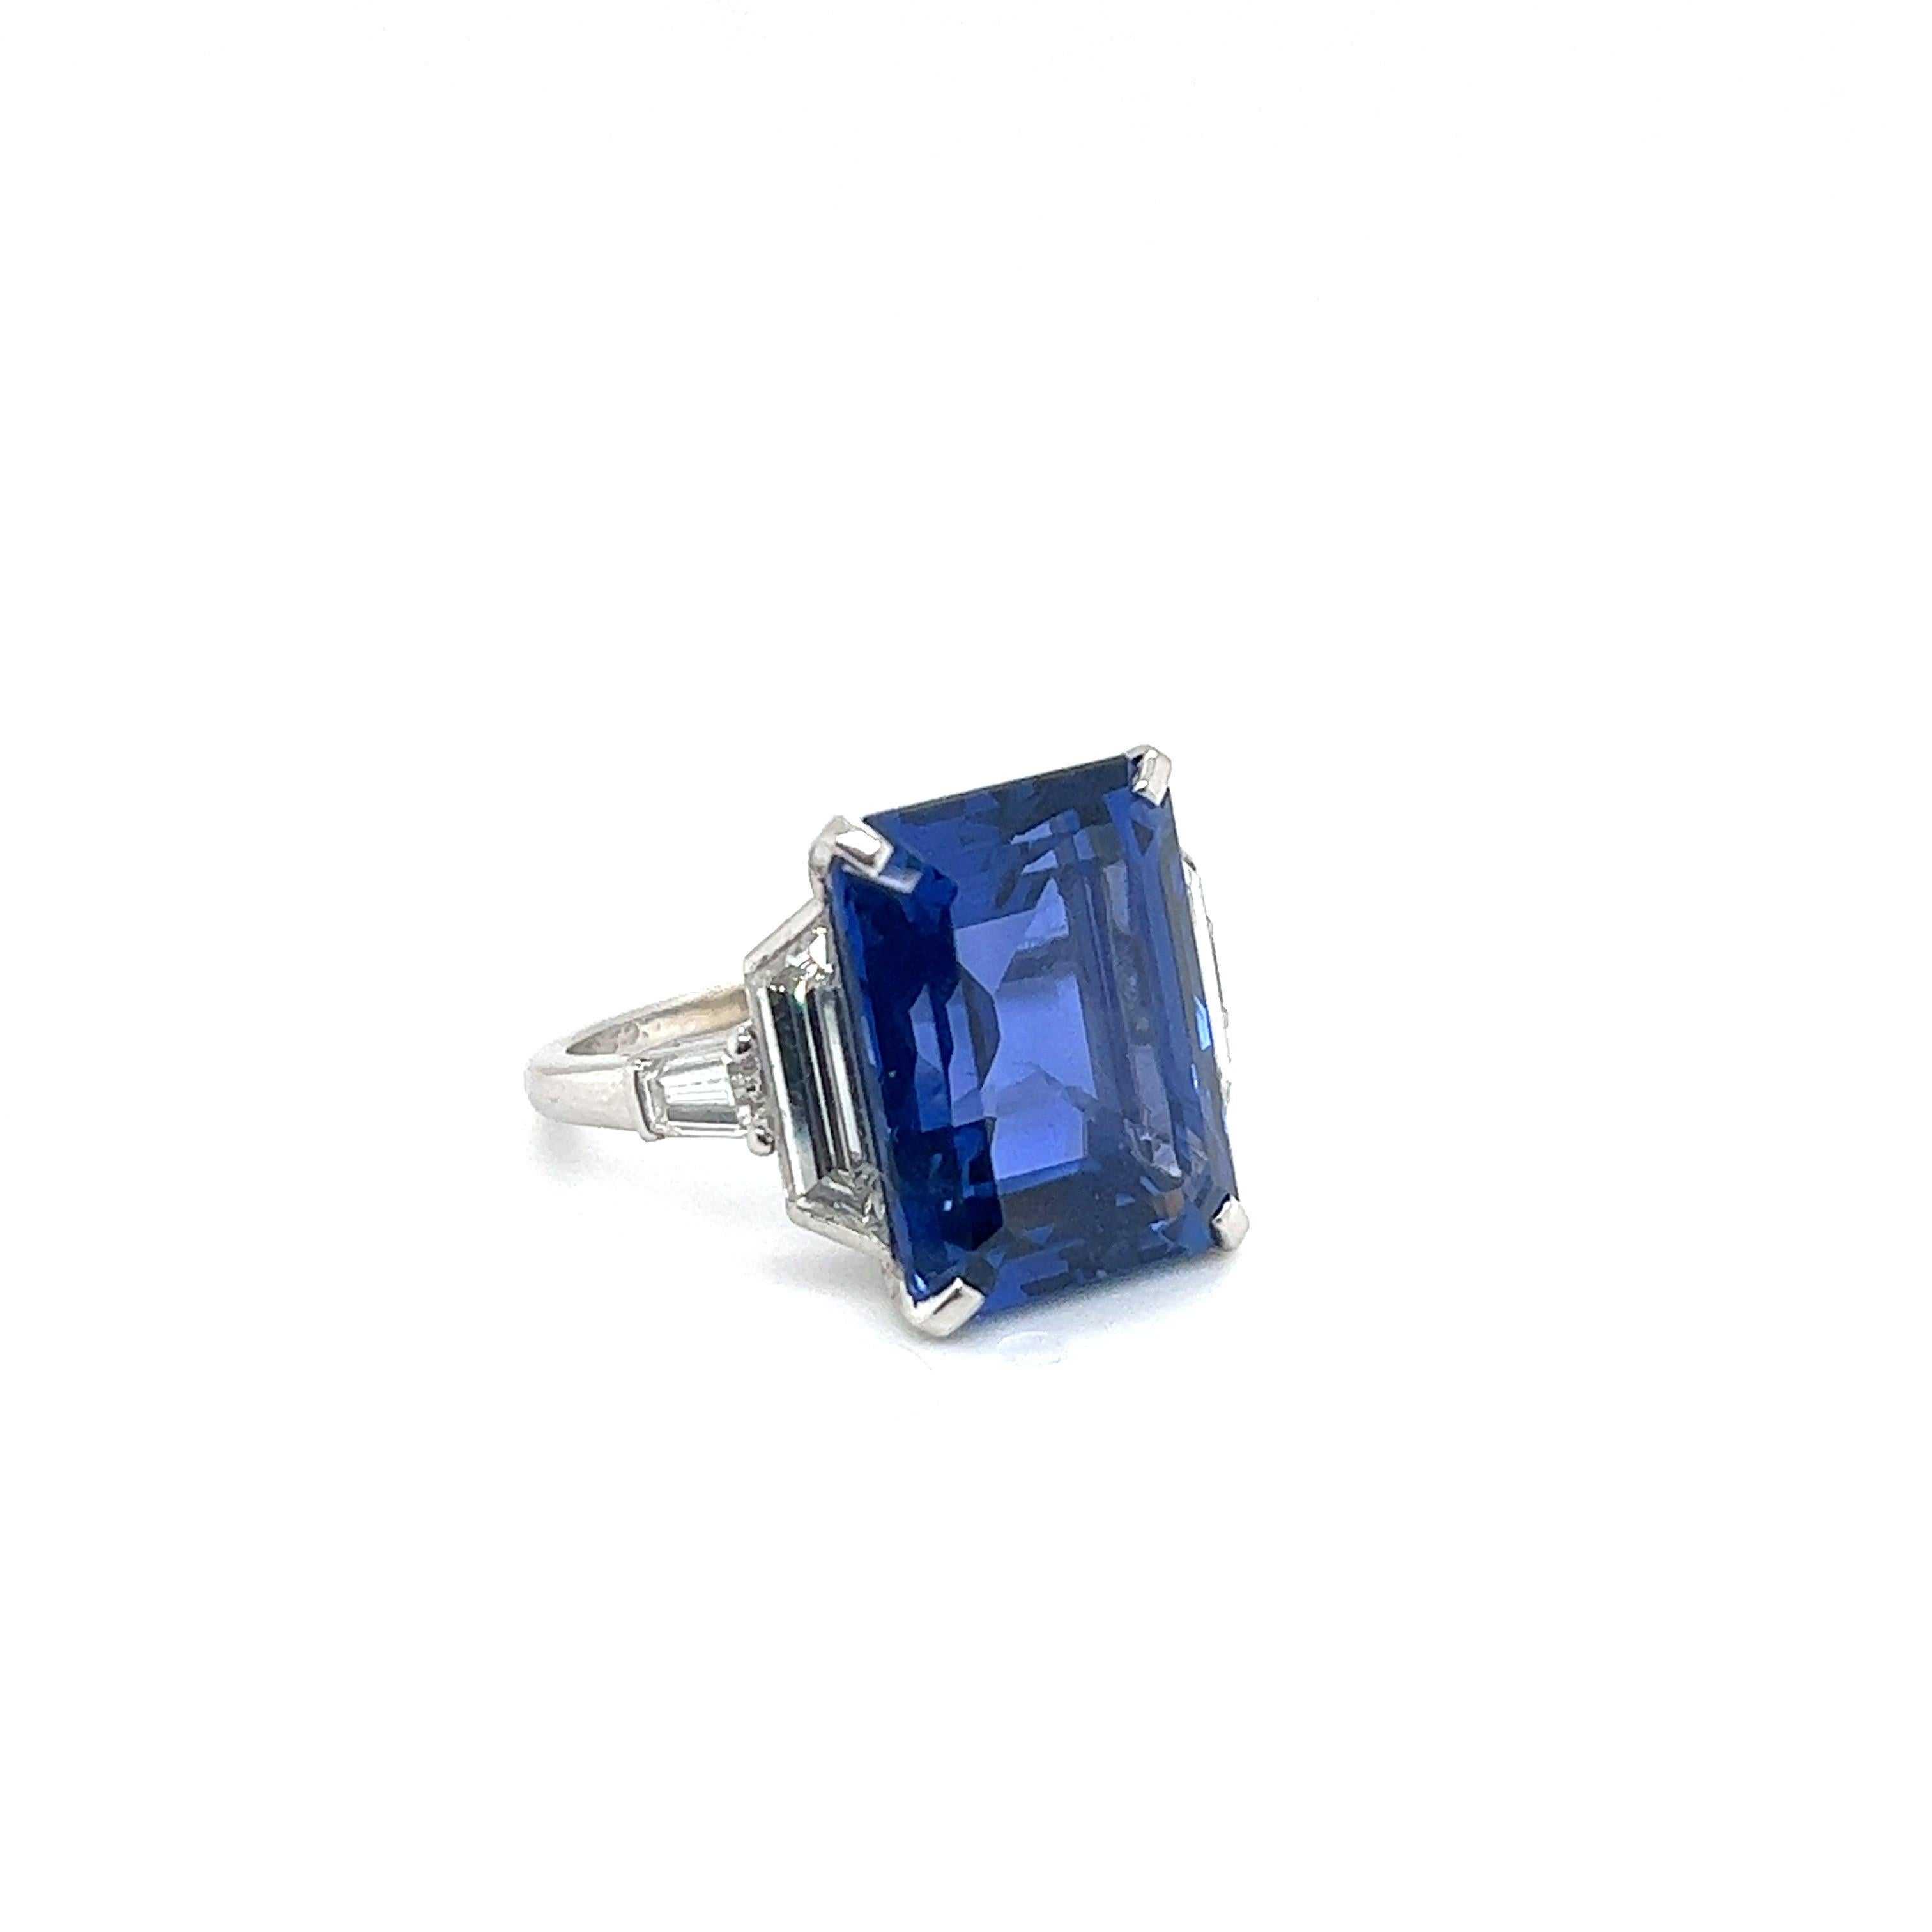 Splendid 16.50 carat Ceylon sapphire and diamond solitaire engagement ring.
Elegant ring centering upon a vibrant blue, octagonal sapphire of approximately 16.50 carats, flanked by two trapezoid-shaped diamonds and the ring shoulders enhanced with 2